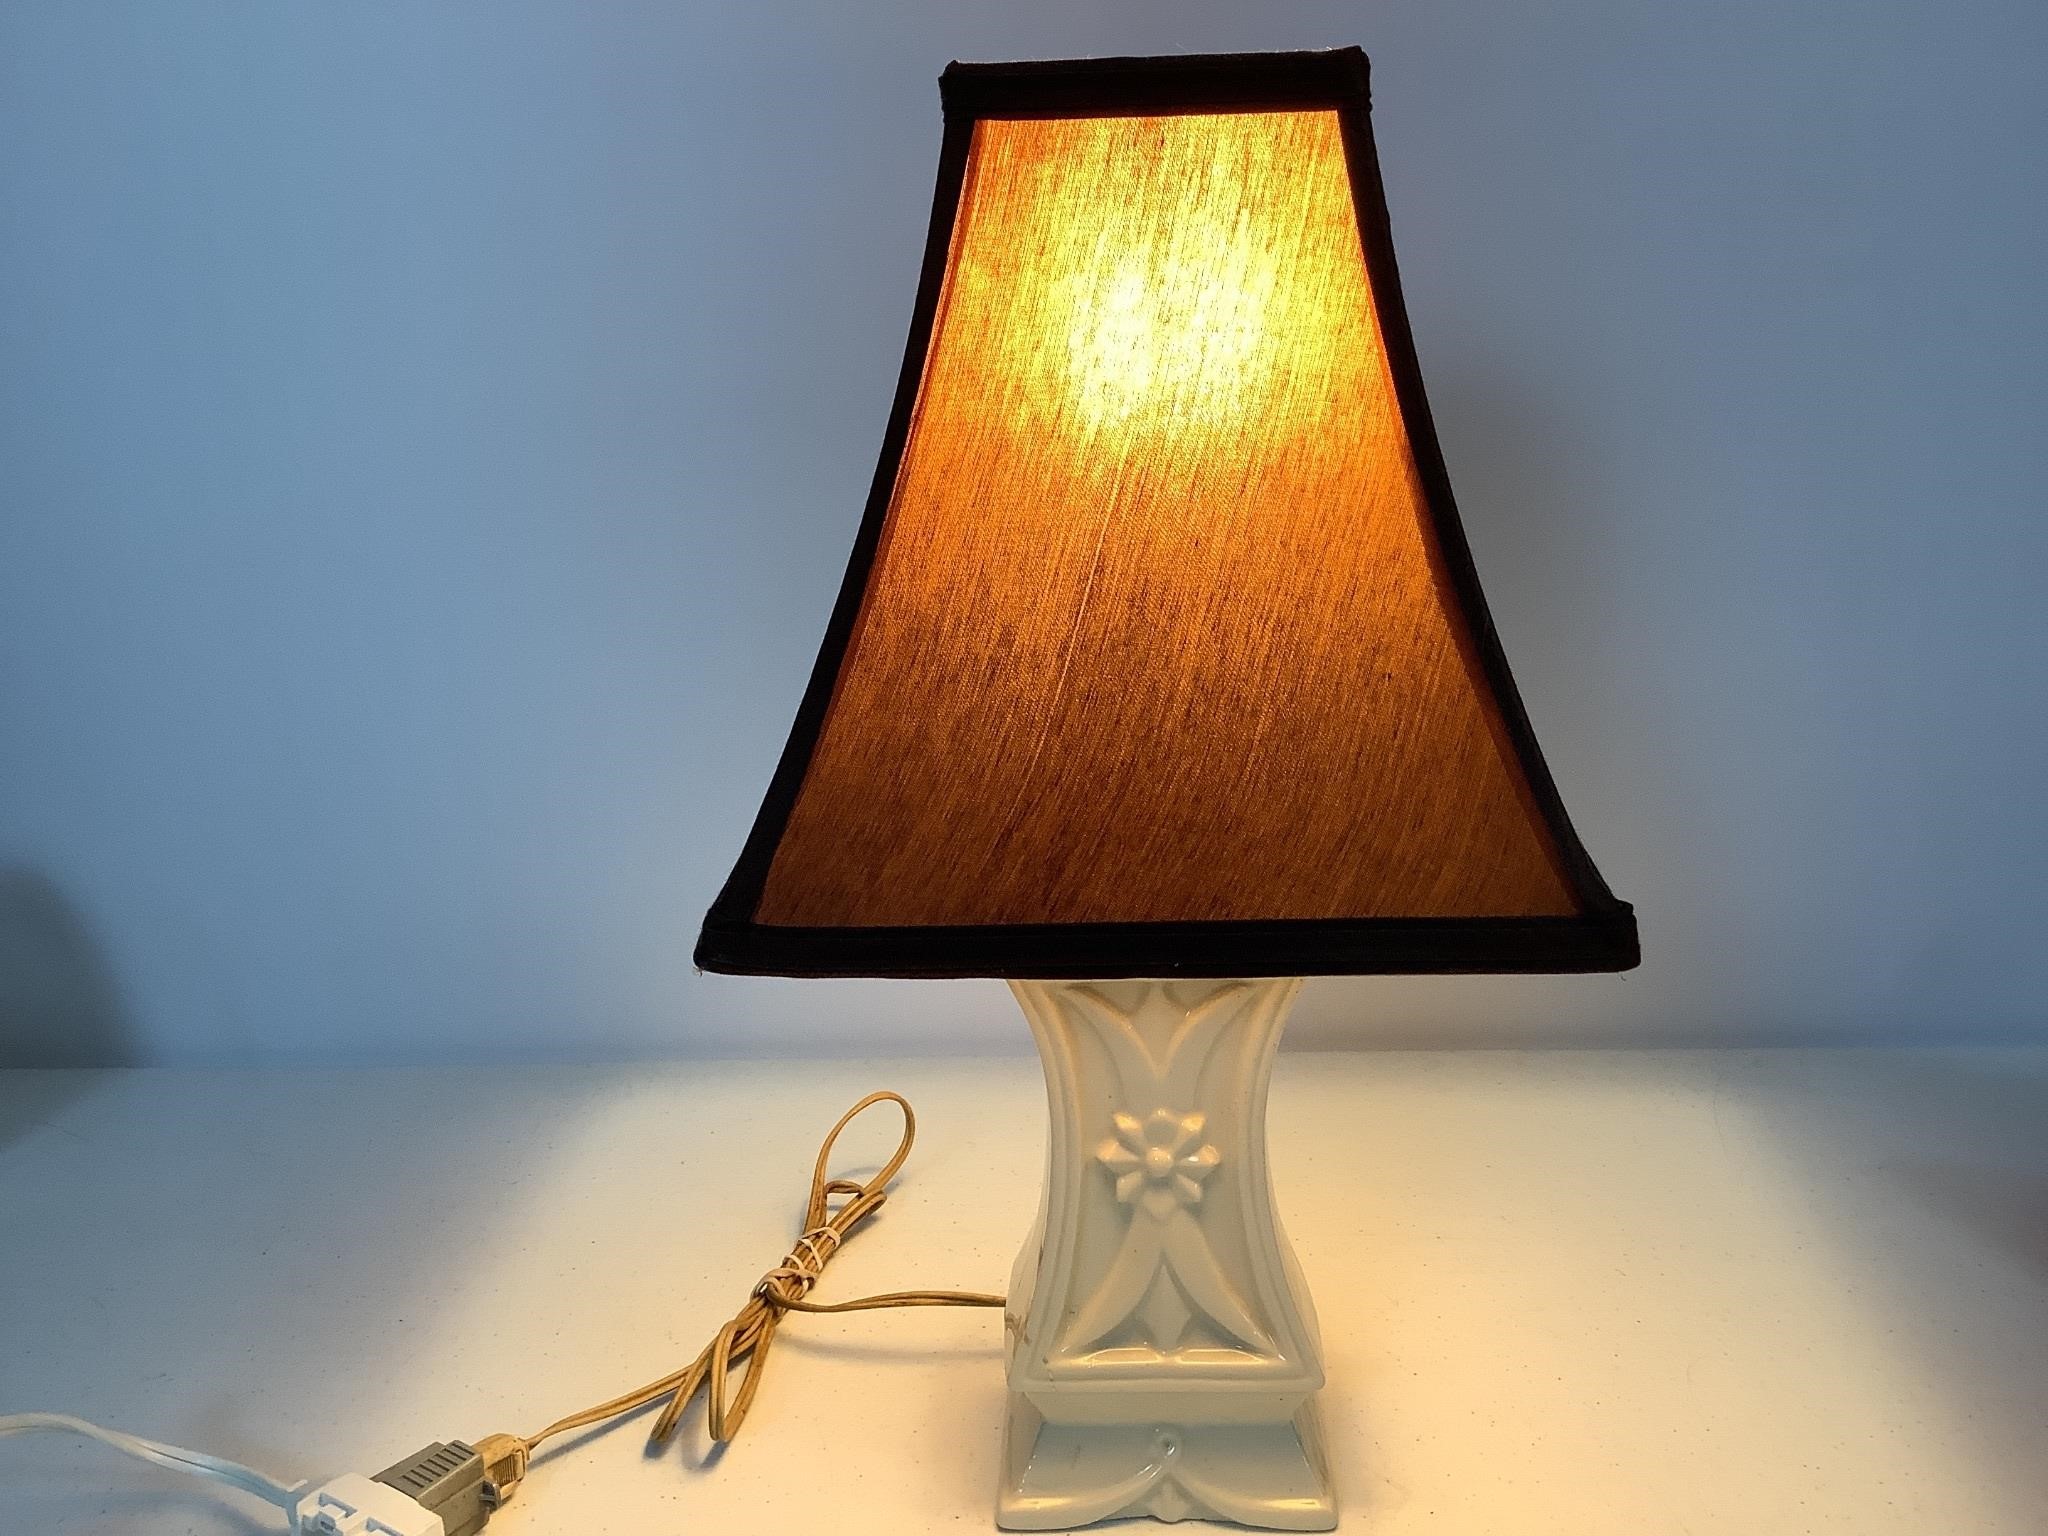 17" TALL PORCELAIN TABLE LAMP - WORKS